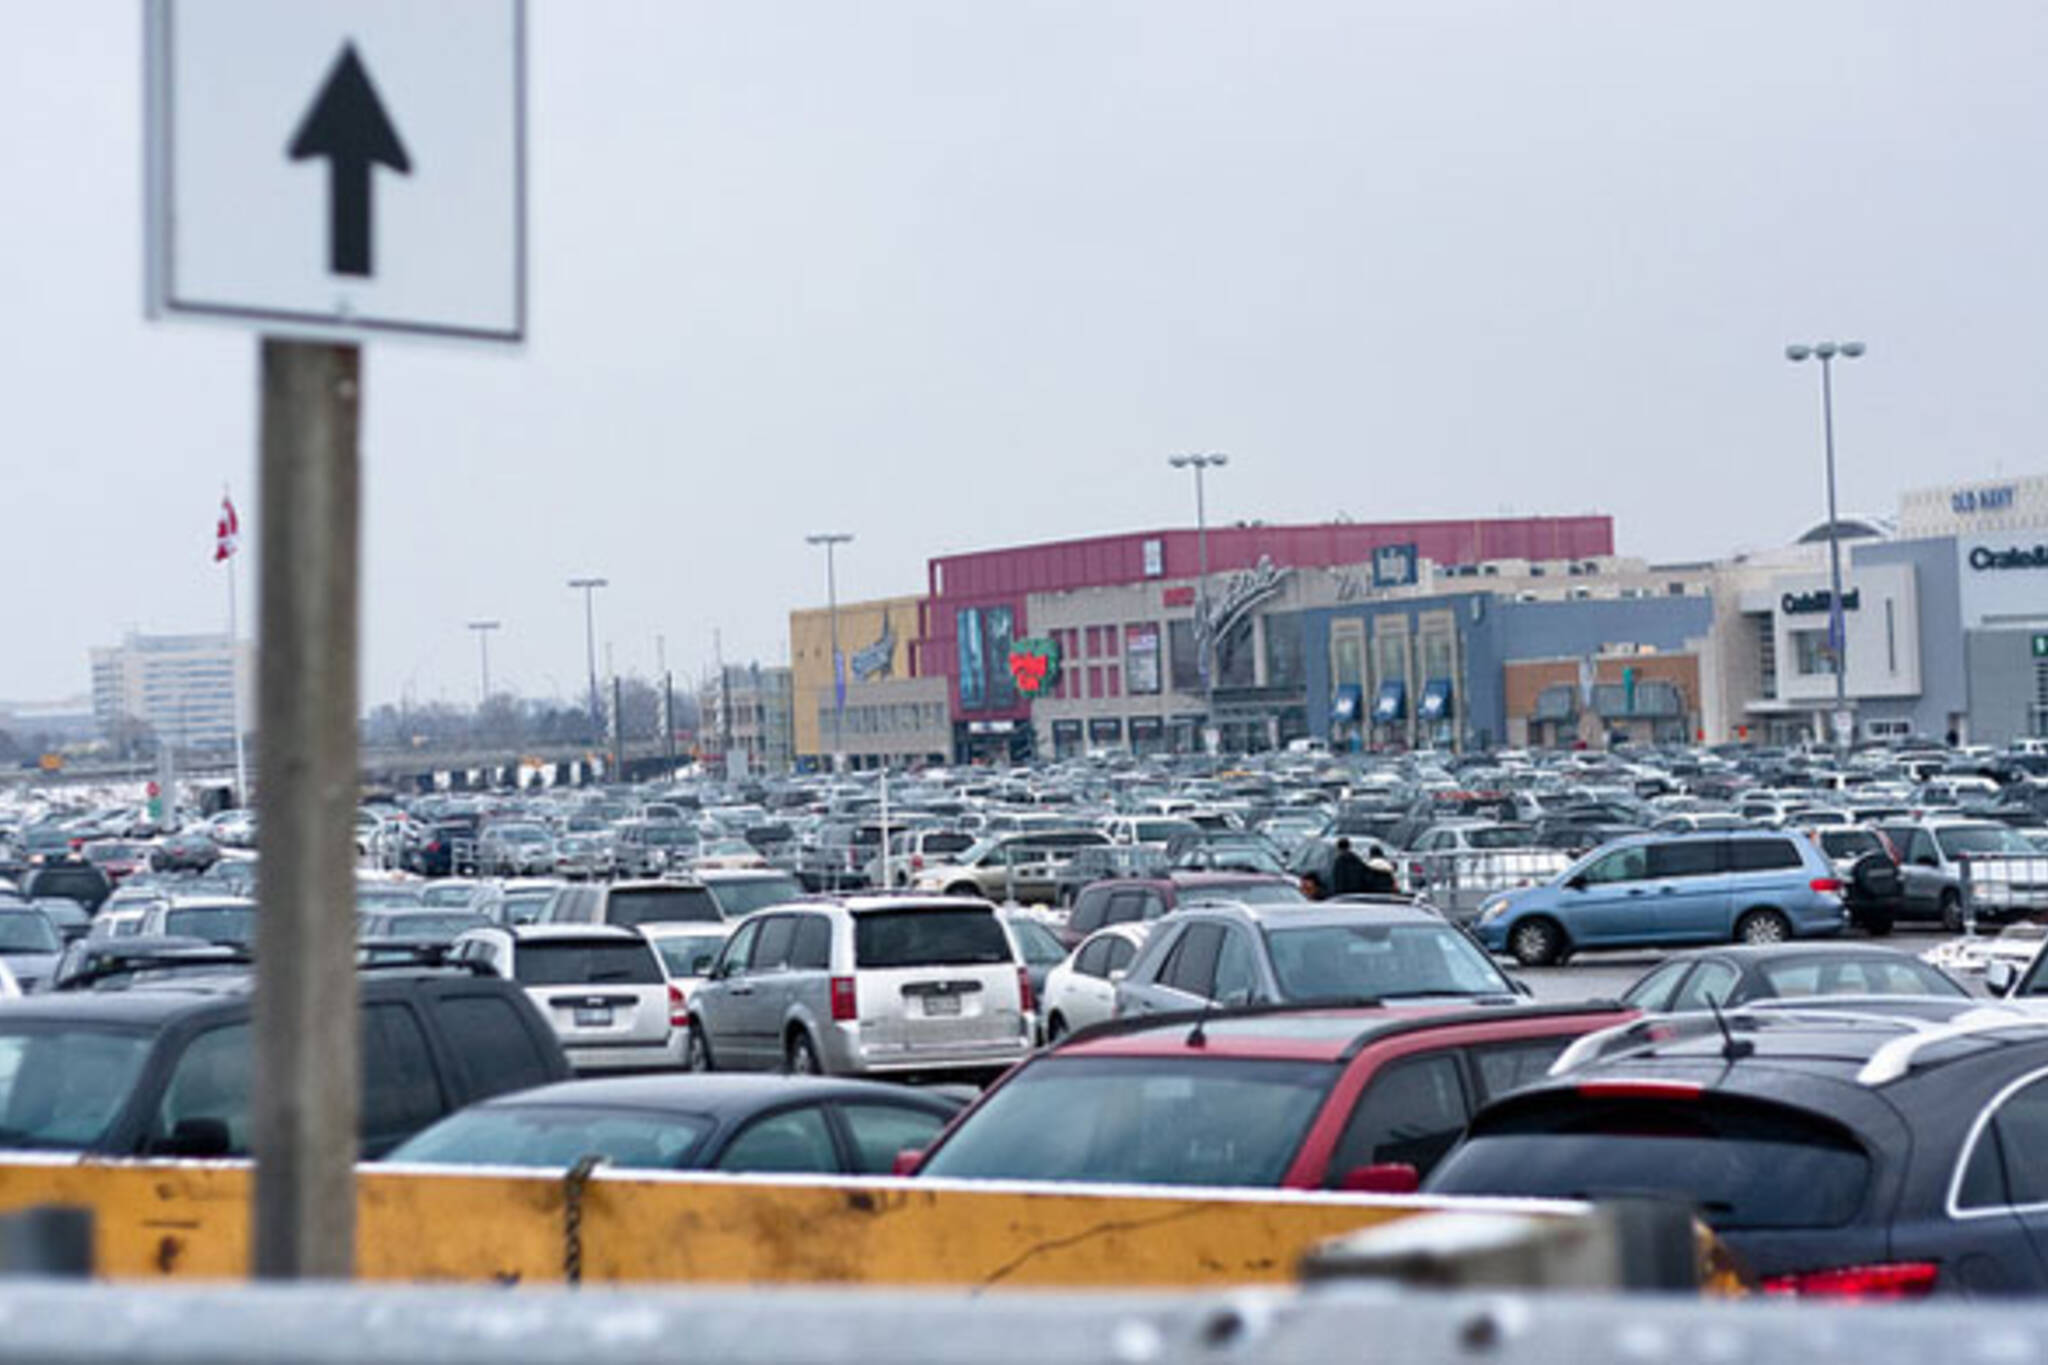 Yorkdale parking lot